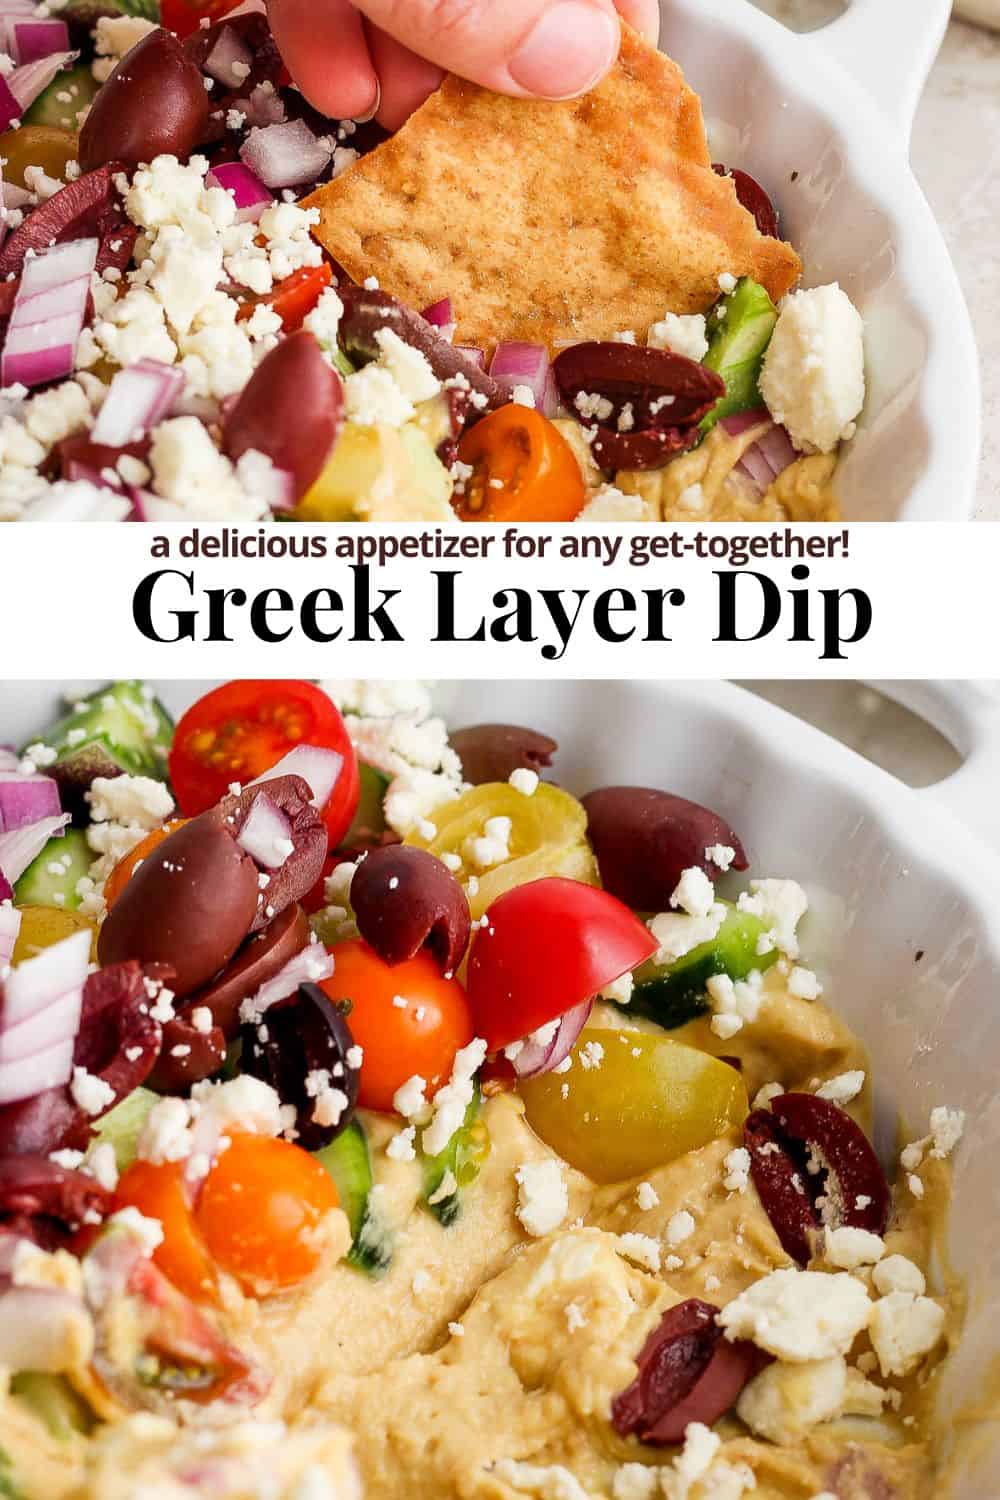 Pinterest image of greek layer dip with the title, "greek layer dip. A delicious appetizer for any get-together!"